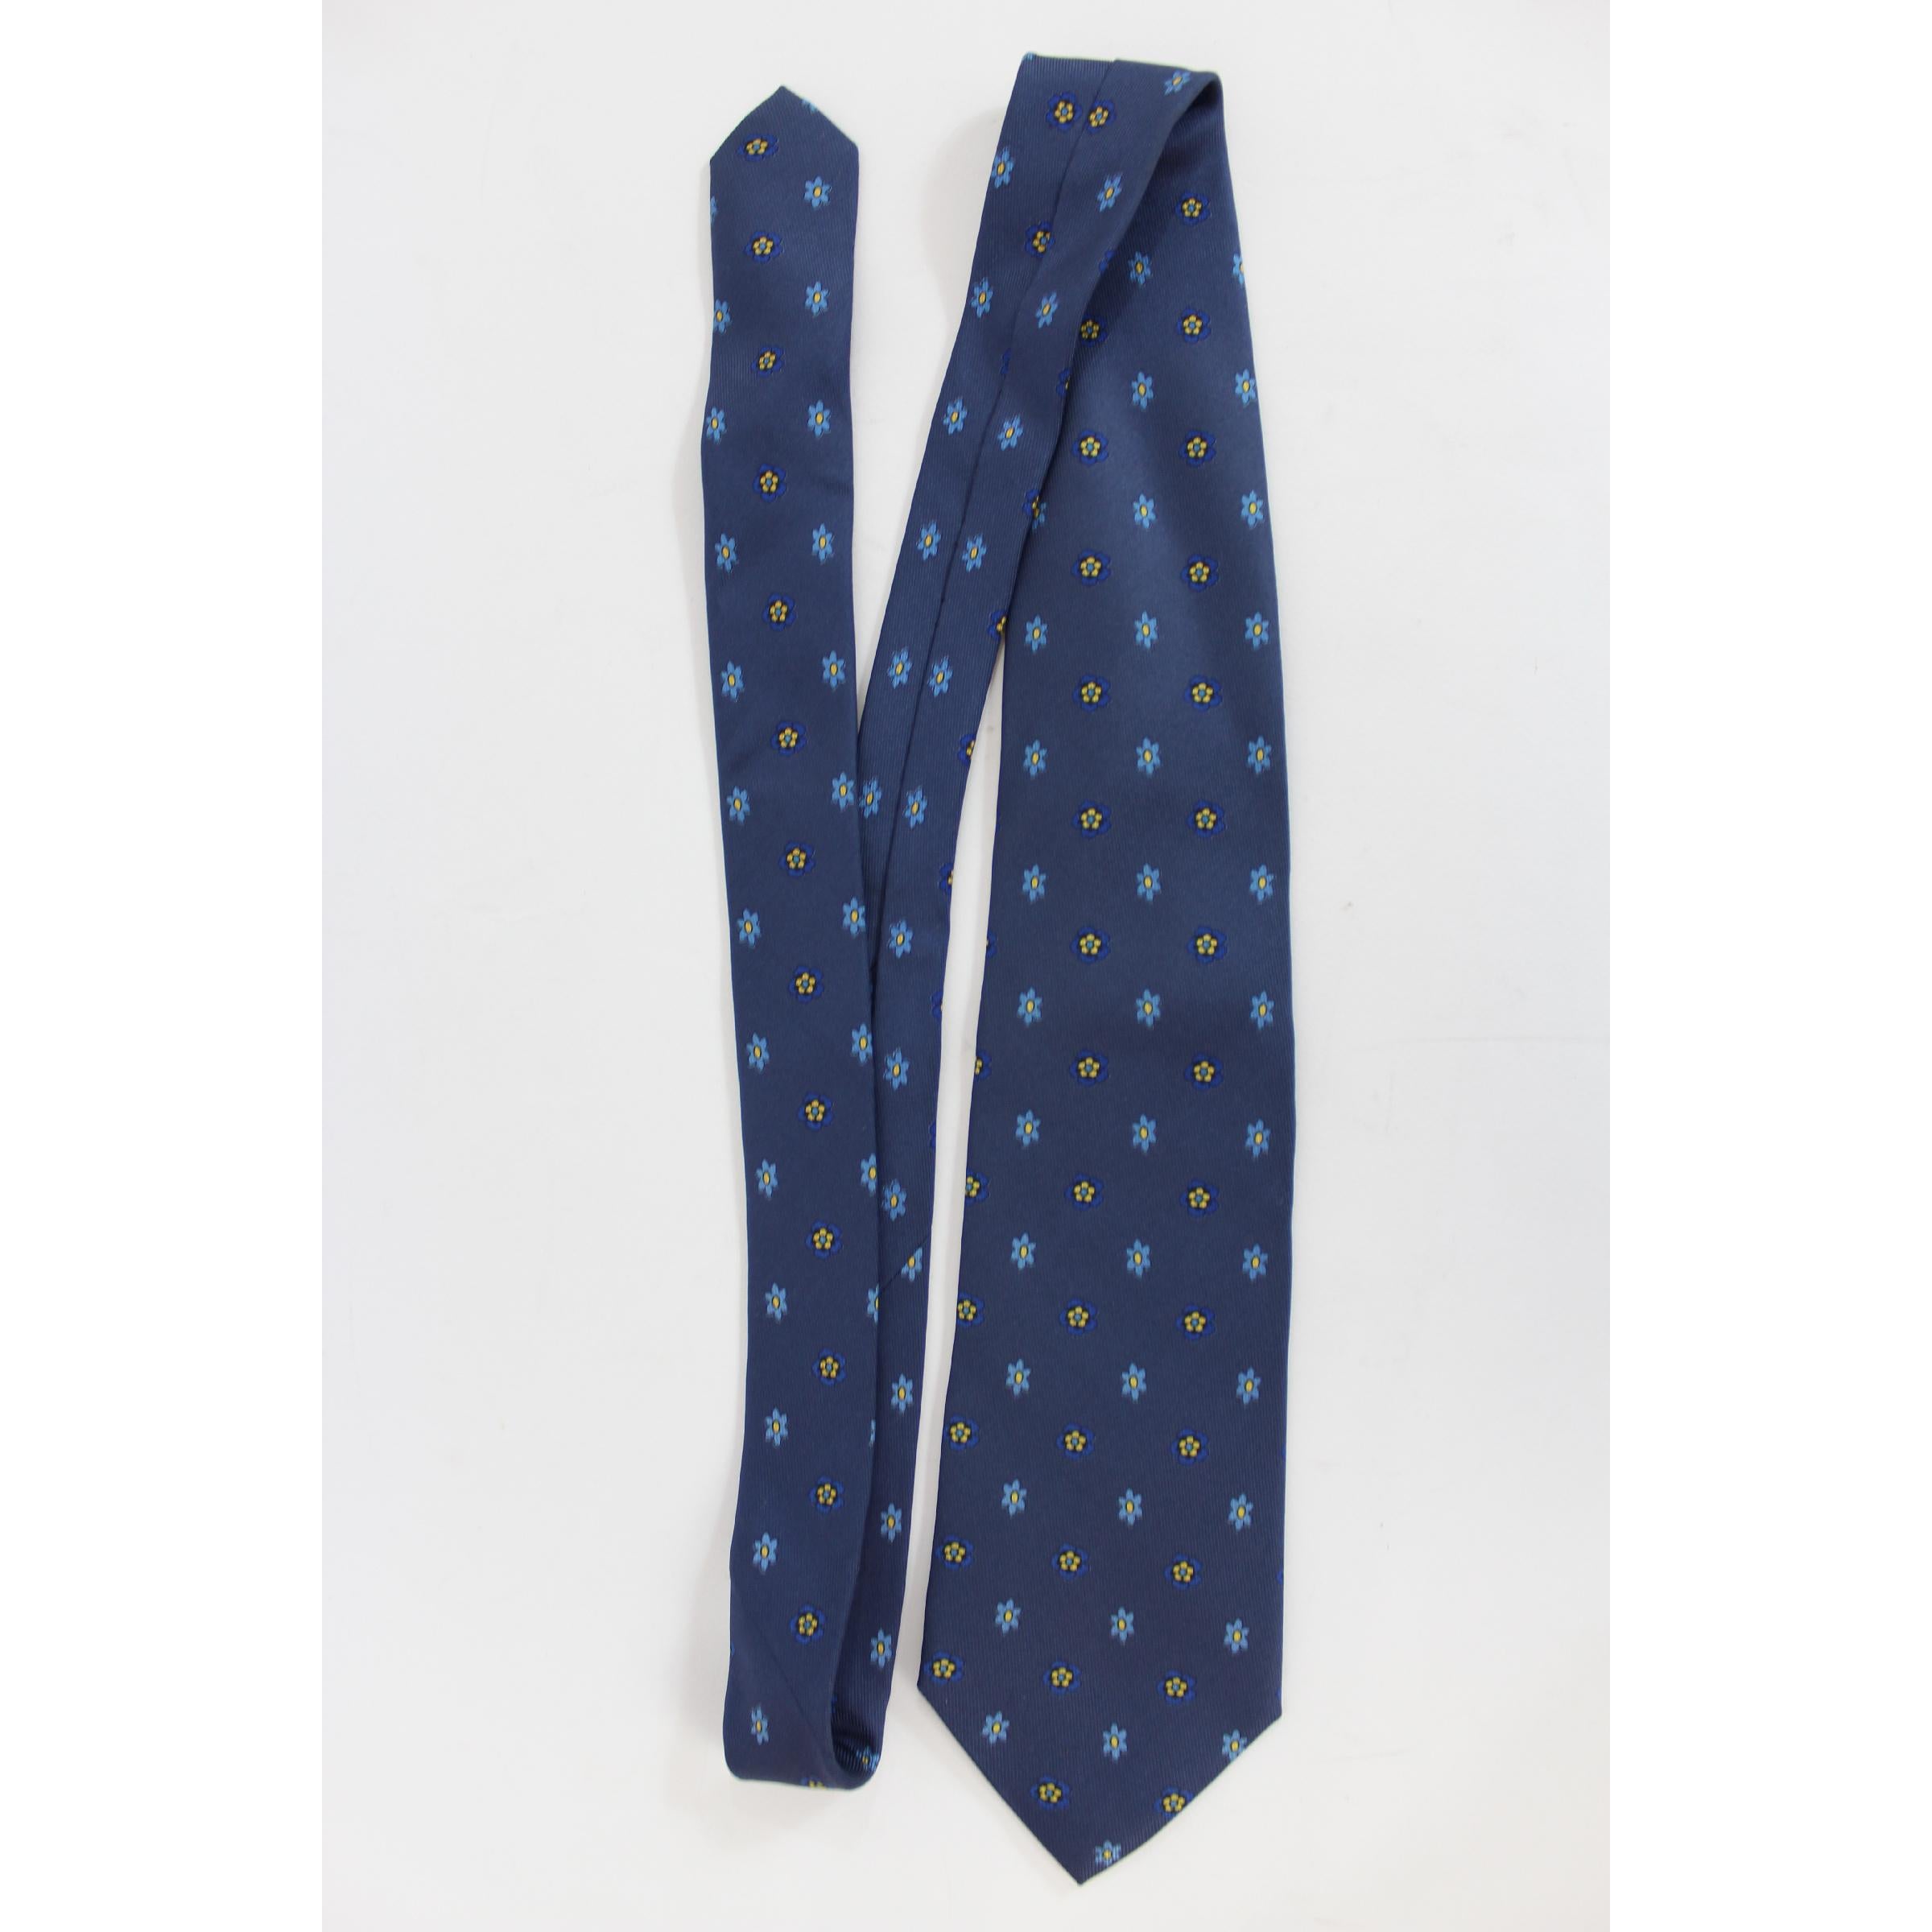 Etro vintage tie 1990s, blue color with floral pattern, 100% silk. Made in italy.

Length: 145 cm
Width: 10 cm